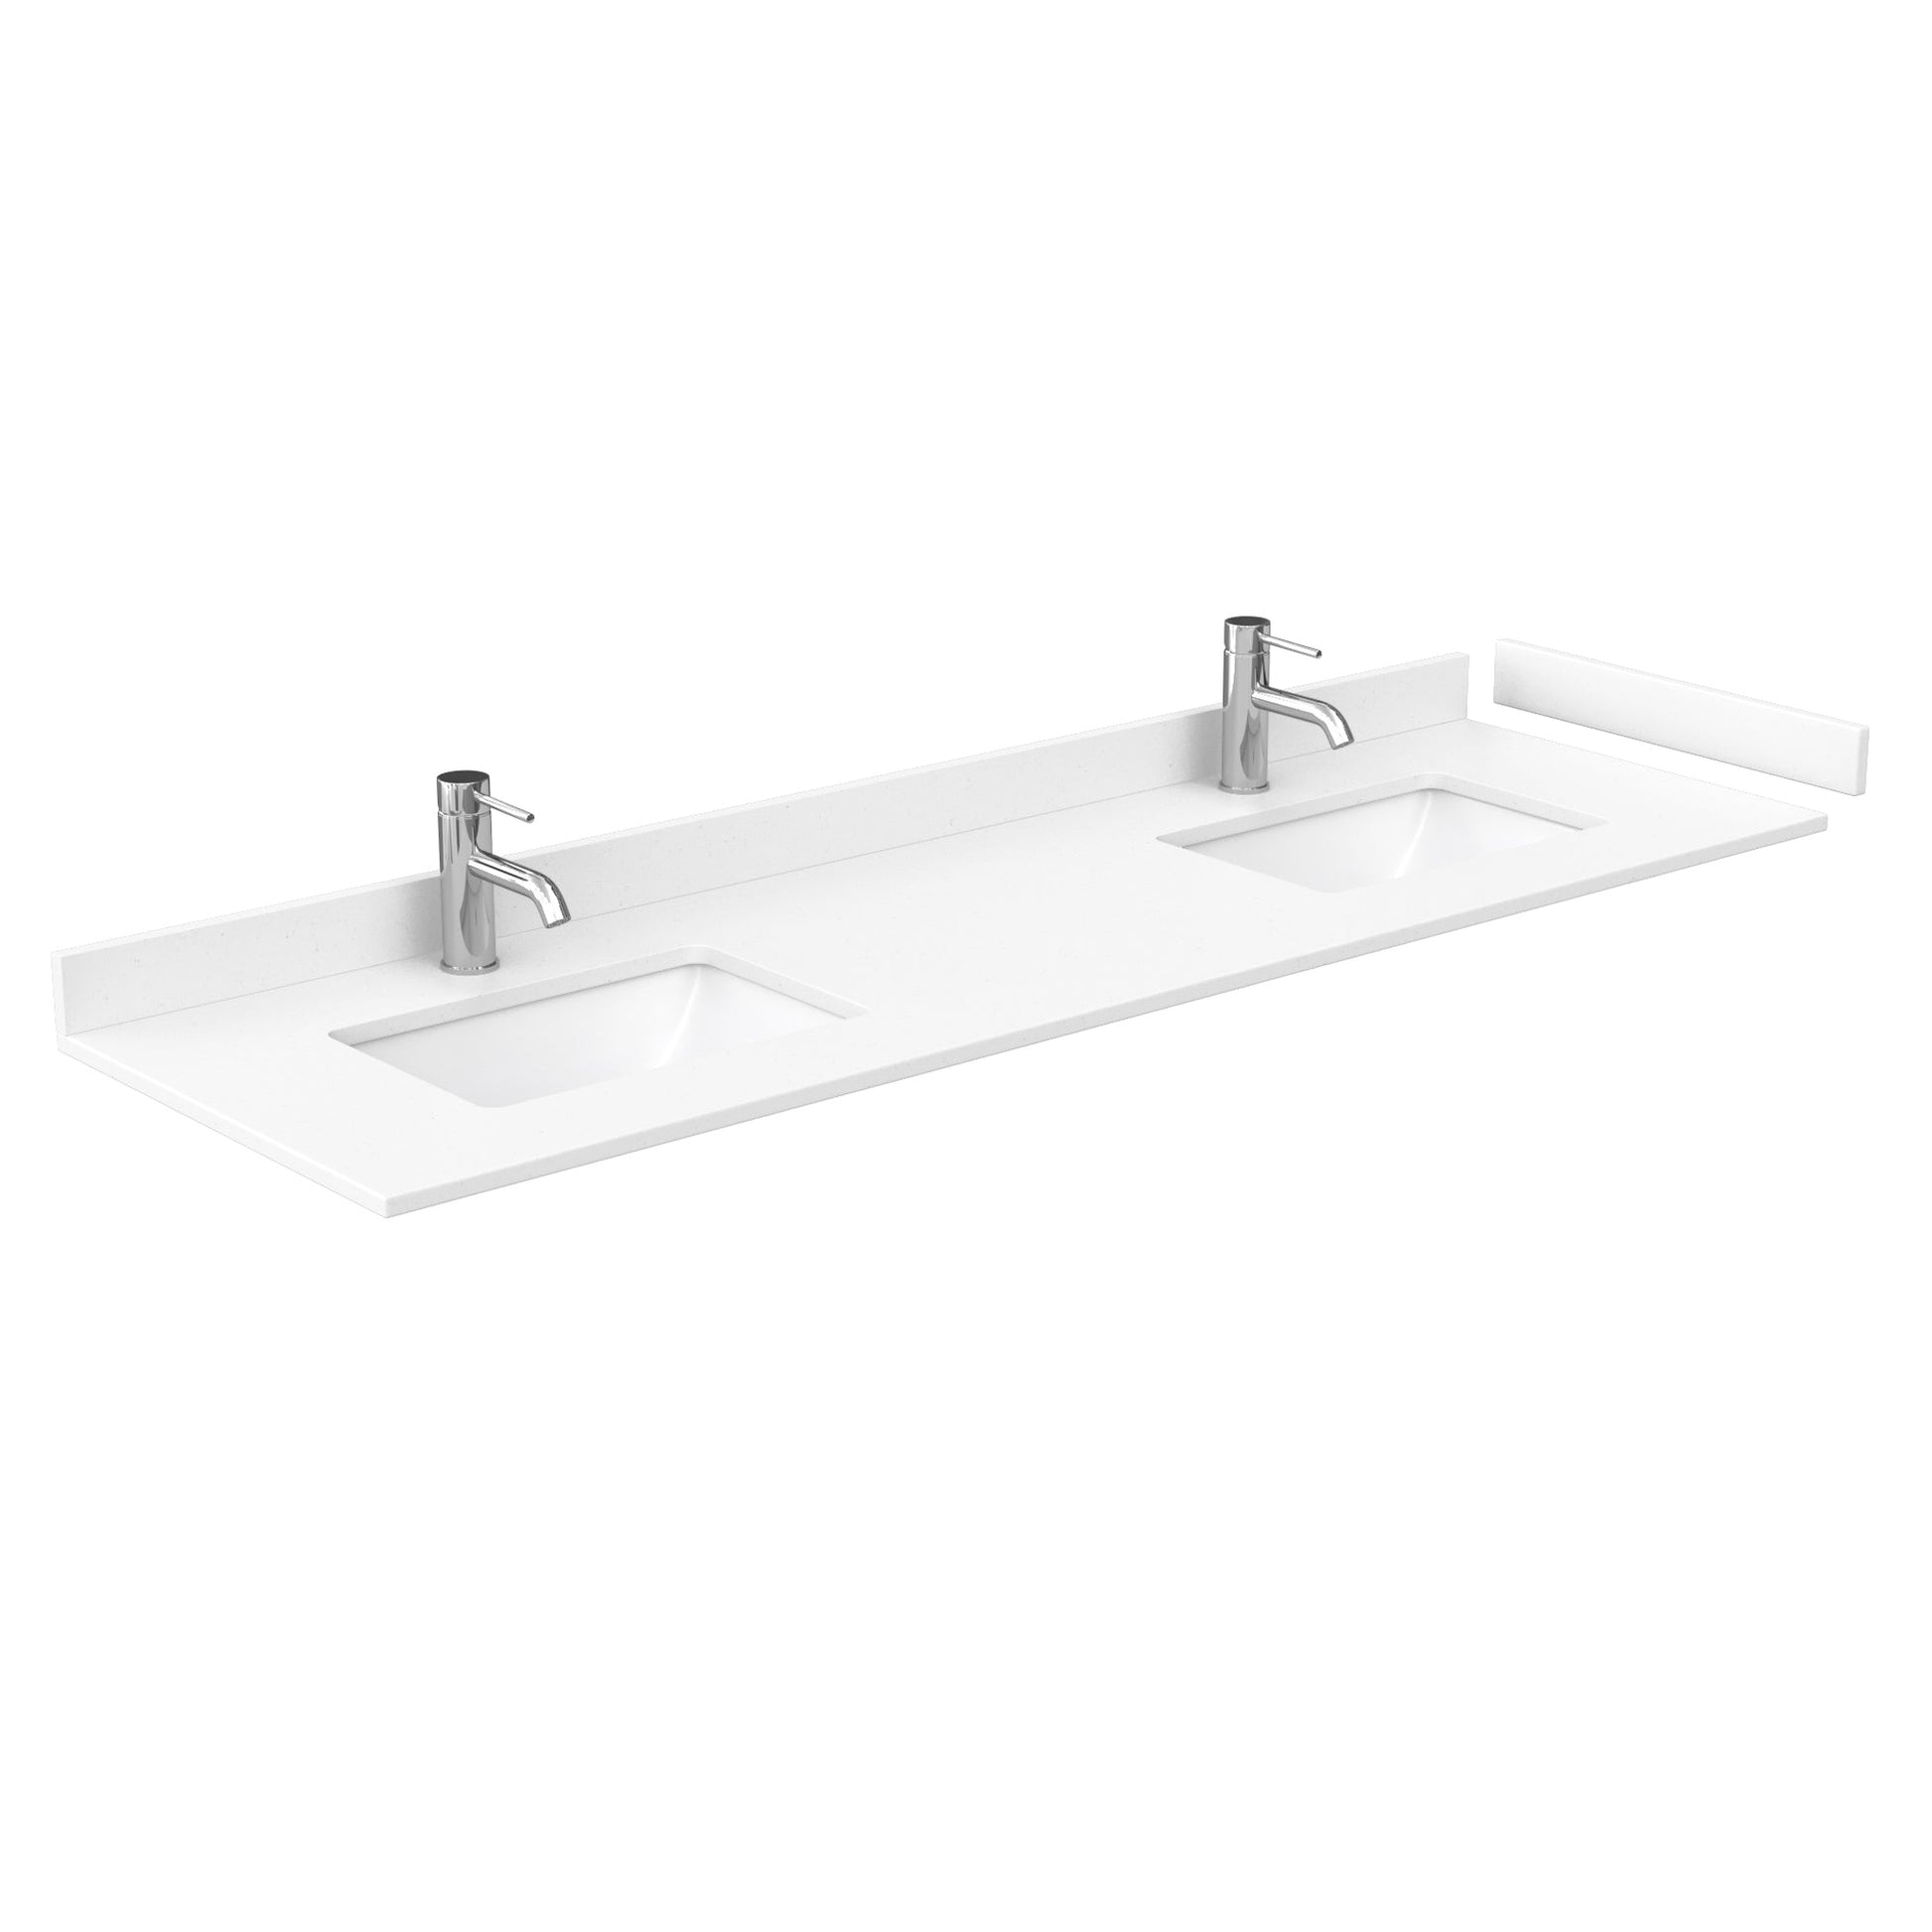 Wyndham Collection Sheffield 72" Double Bathroom Vanity in White, White Cultured Marble Countertop, Undermount Square Sinks, No Mirror